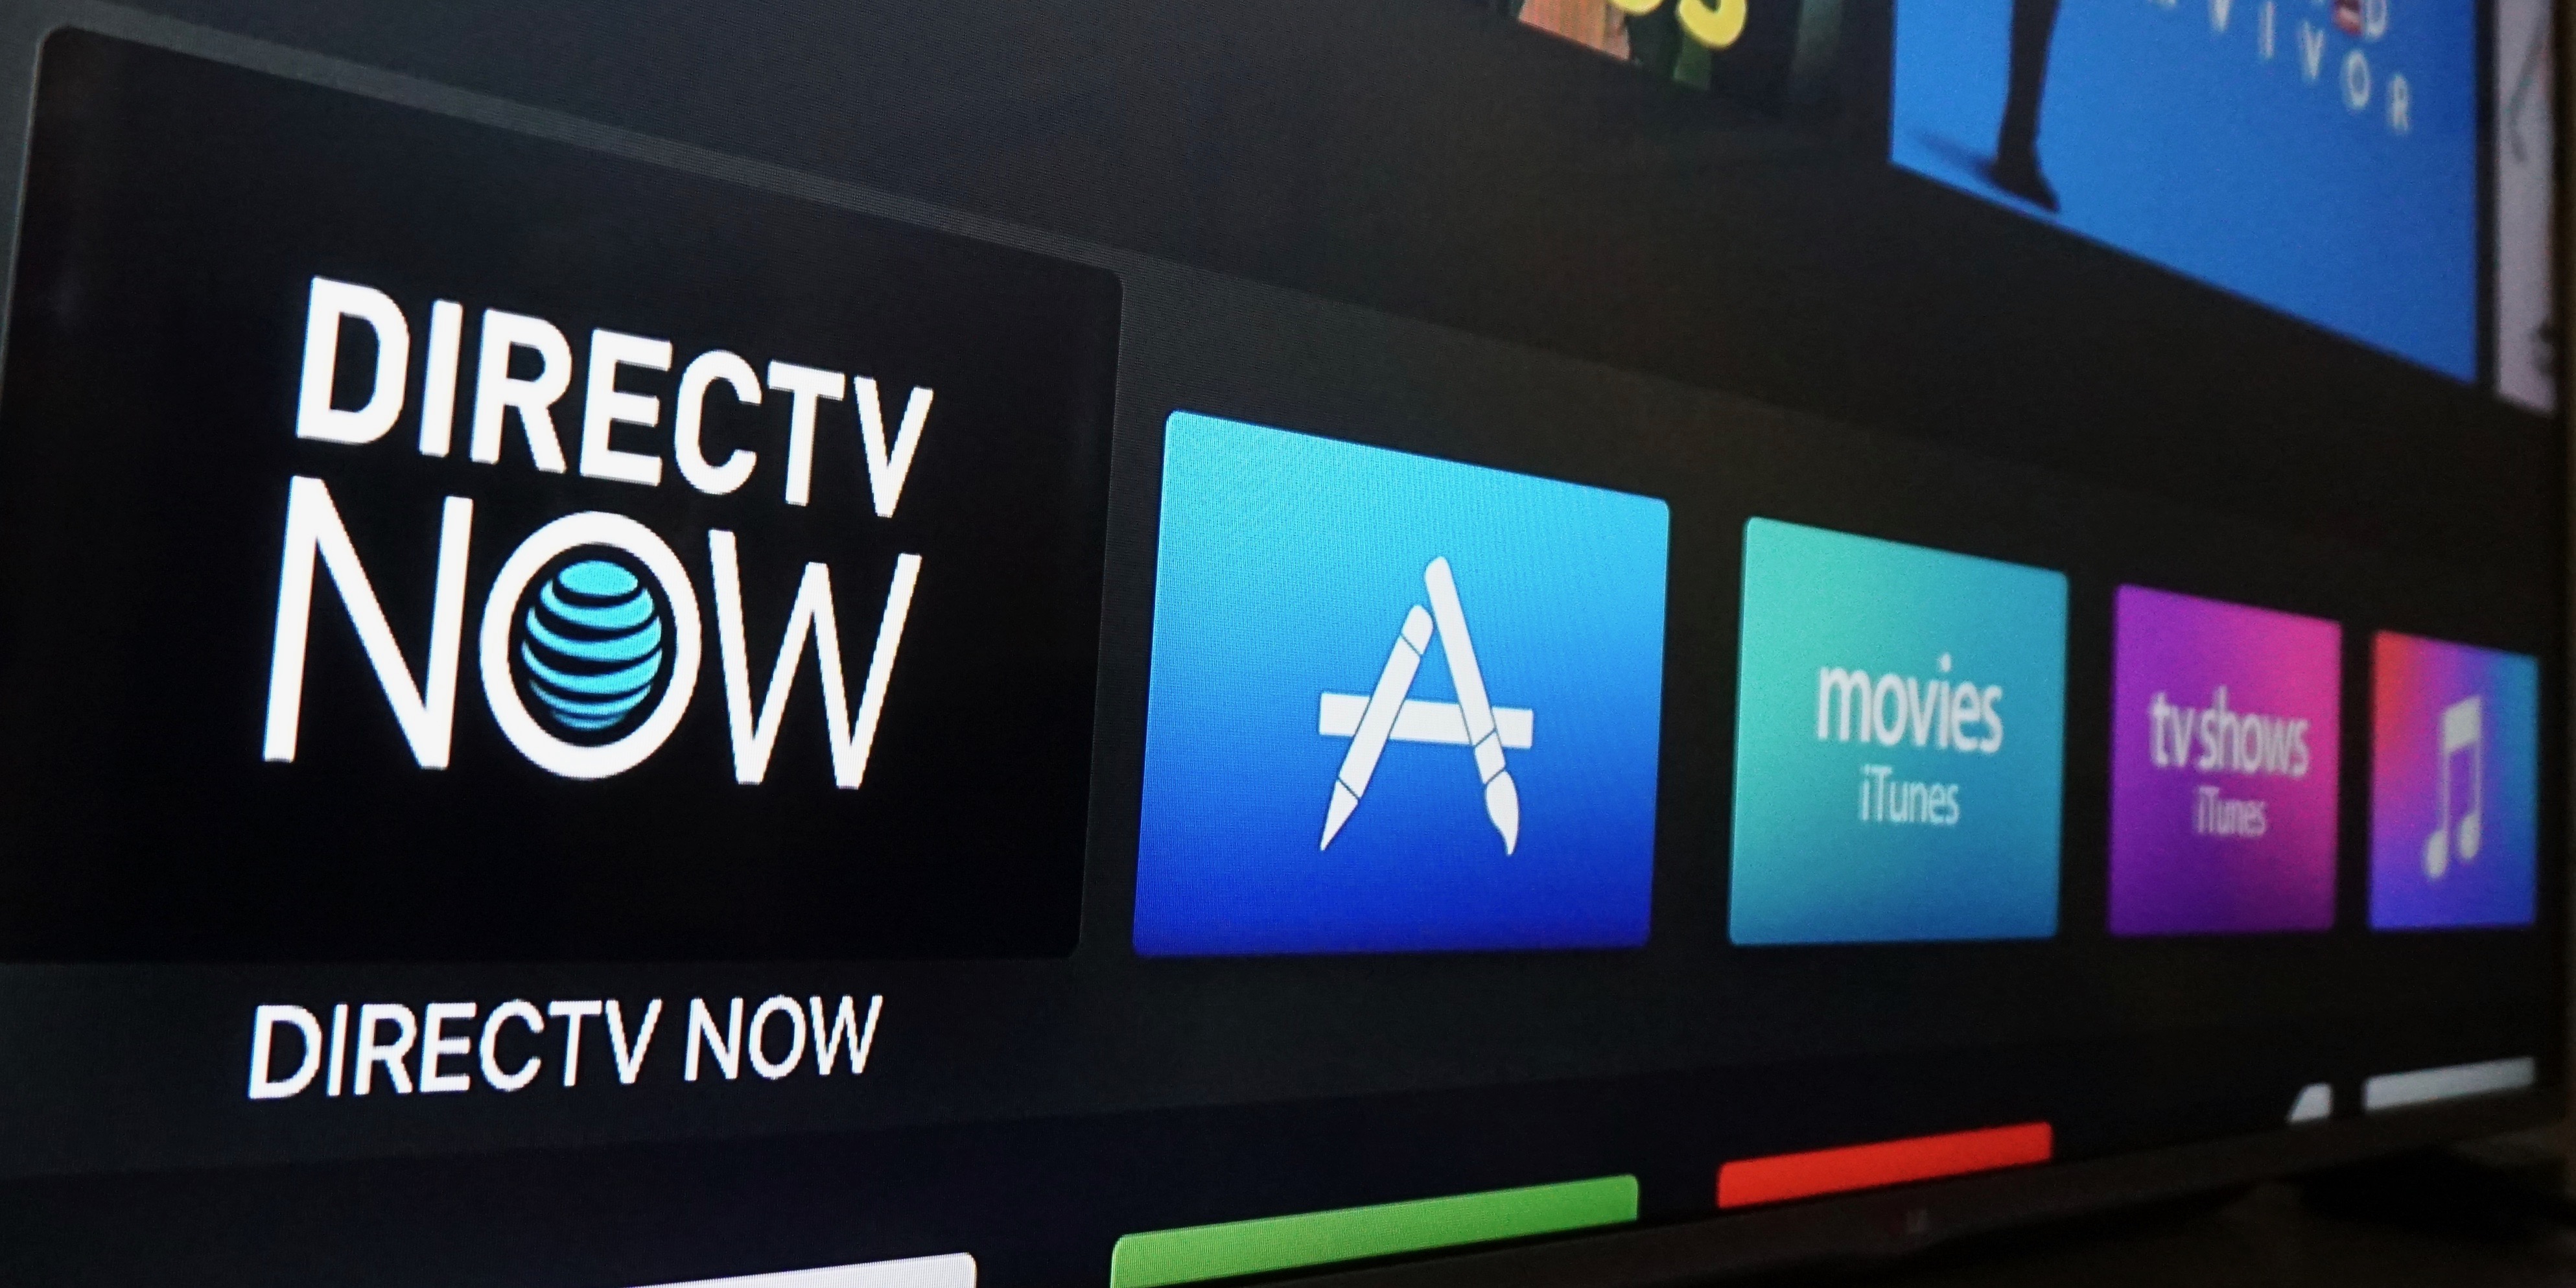 AT&T announces new DirecTV Now promo with free HBO for a year or 5 off